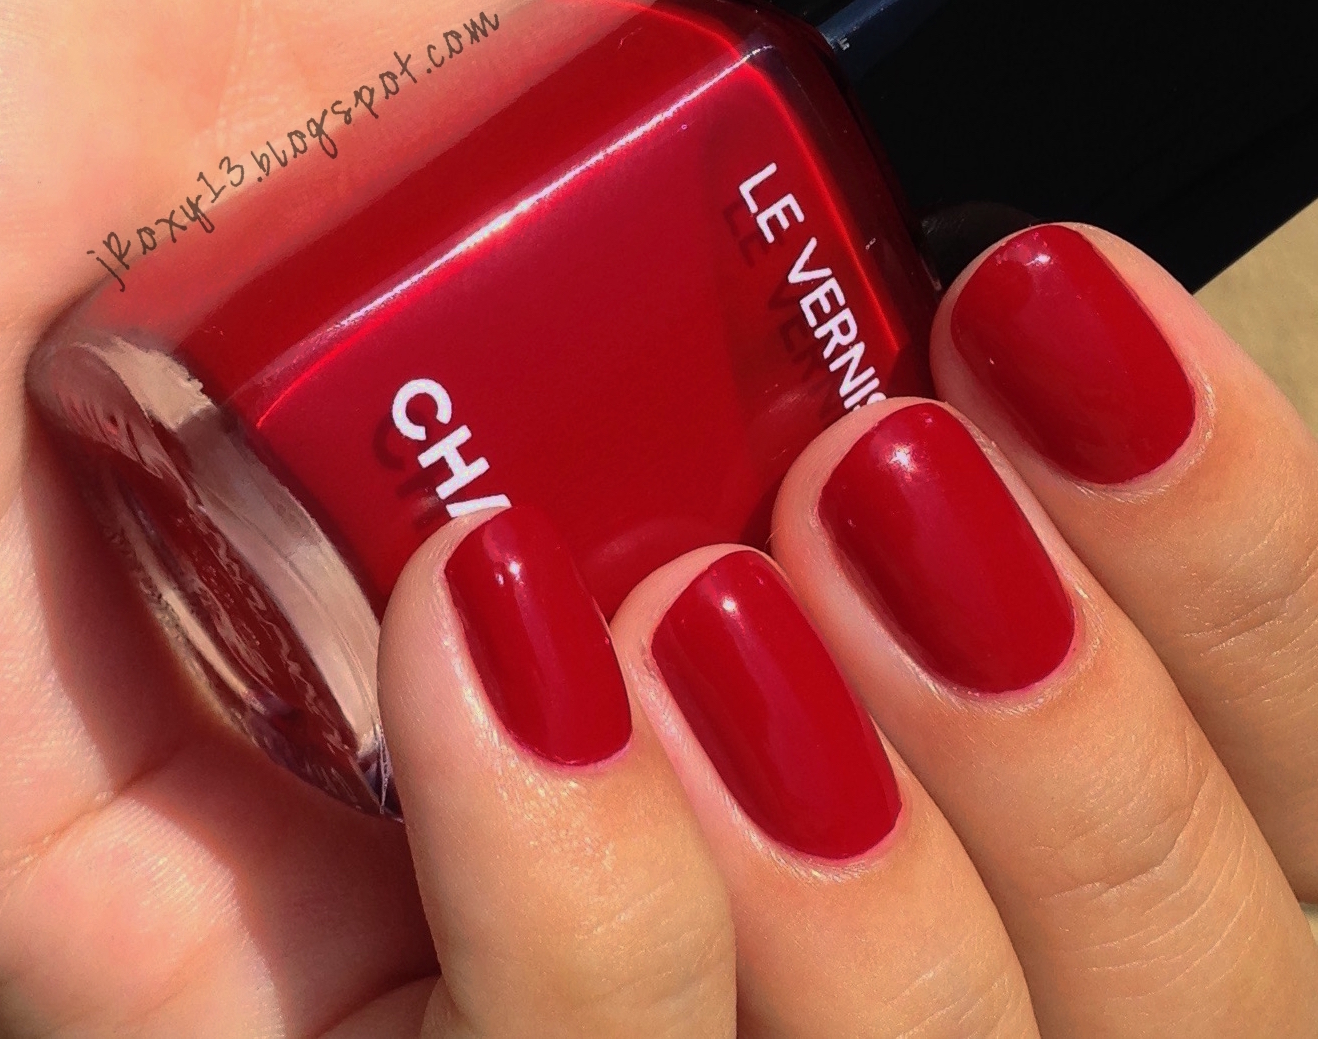 Chanel Le Vernis Longwear Nail Colour in Pirate - wide 9